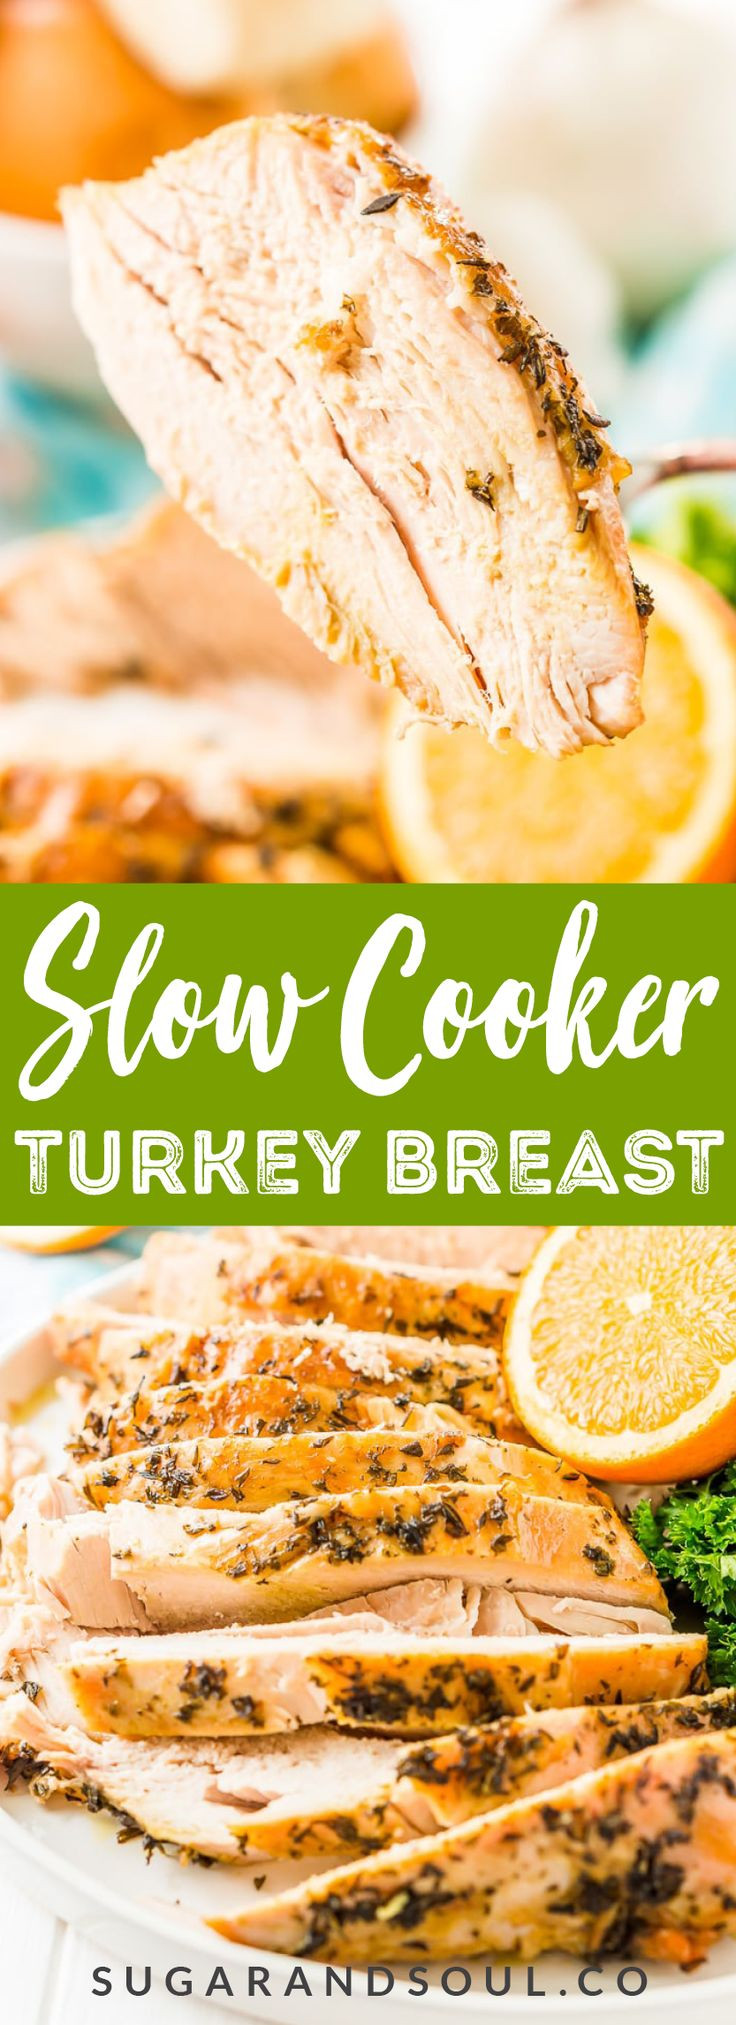 Smallest Turkey For Thanksgiving
 This Slow Cooker Turkey Breast is perfect for a small